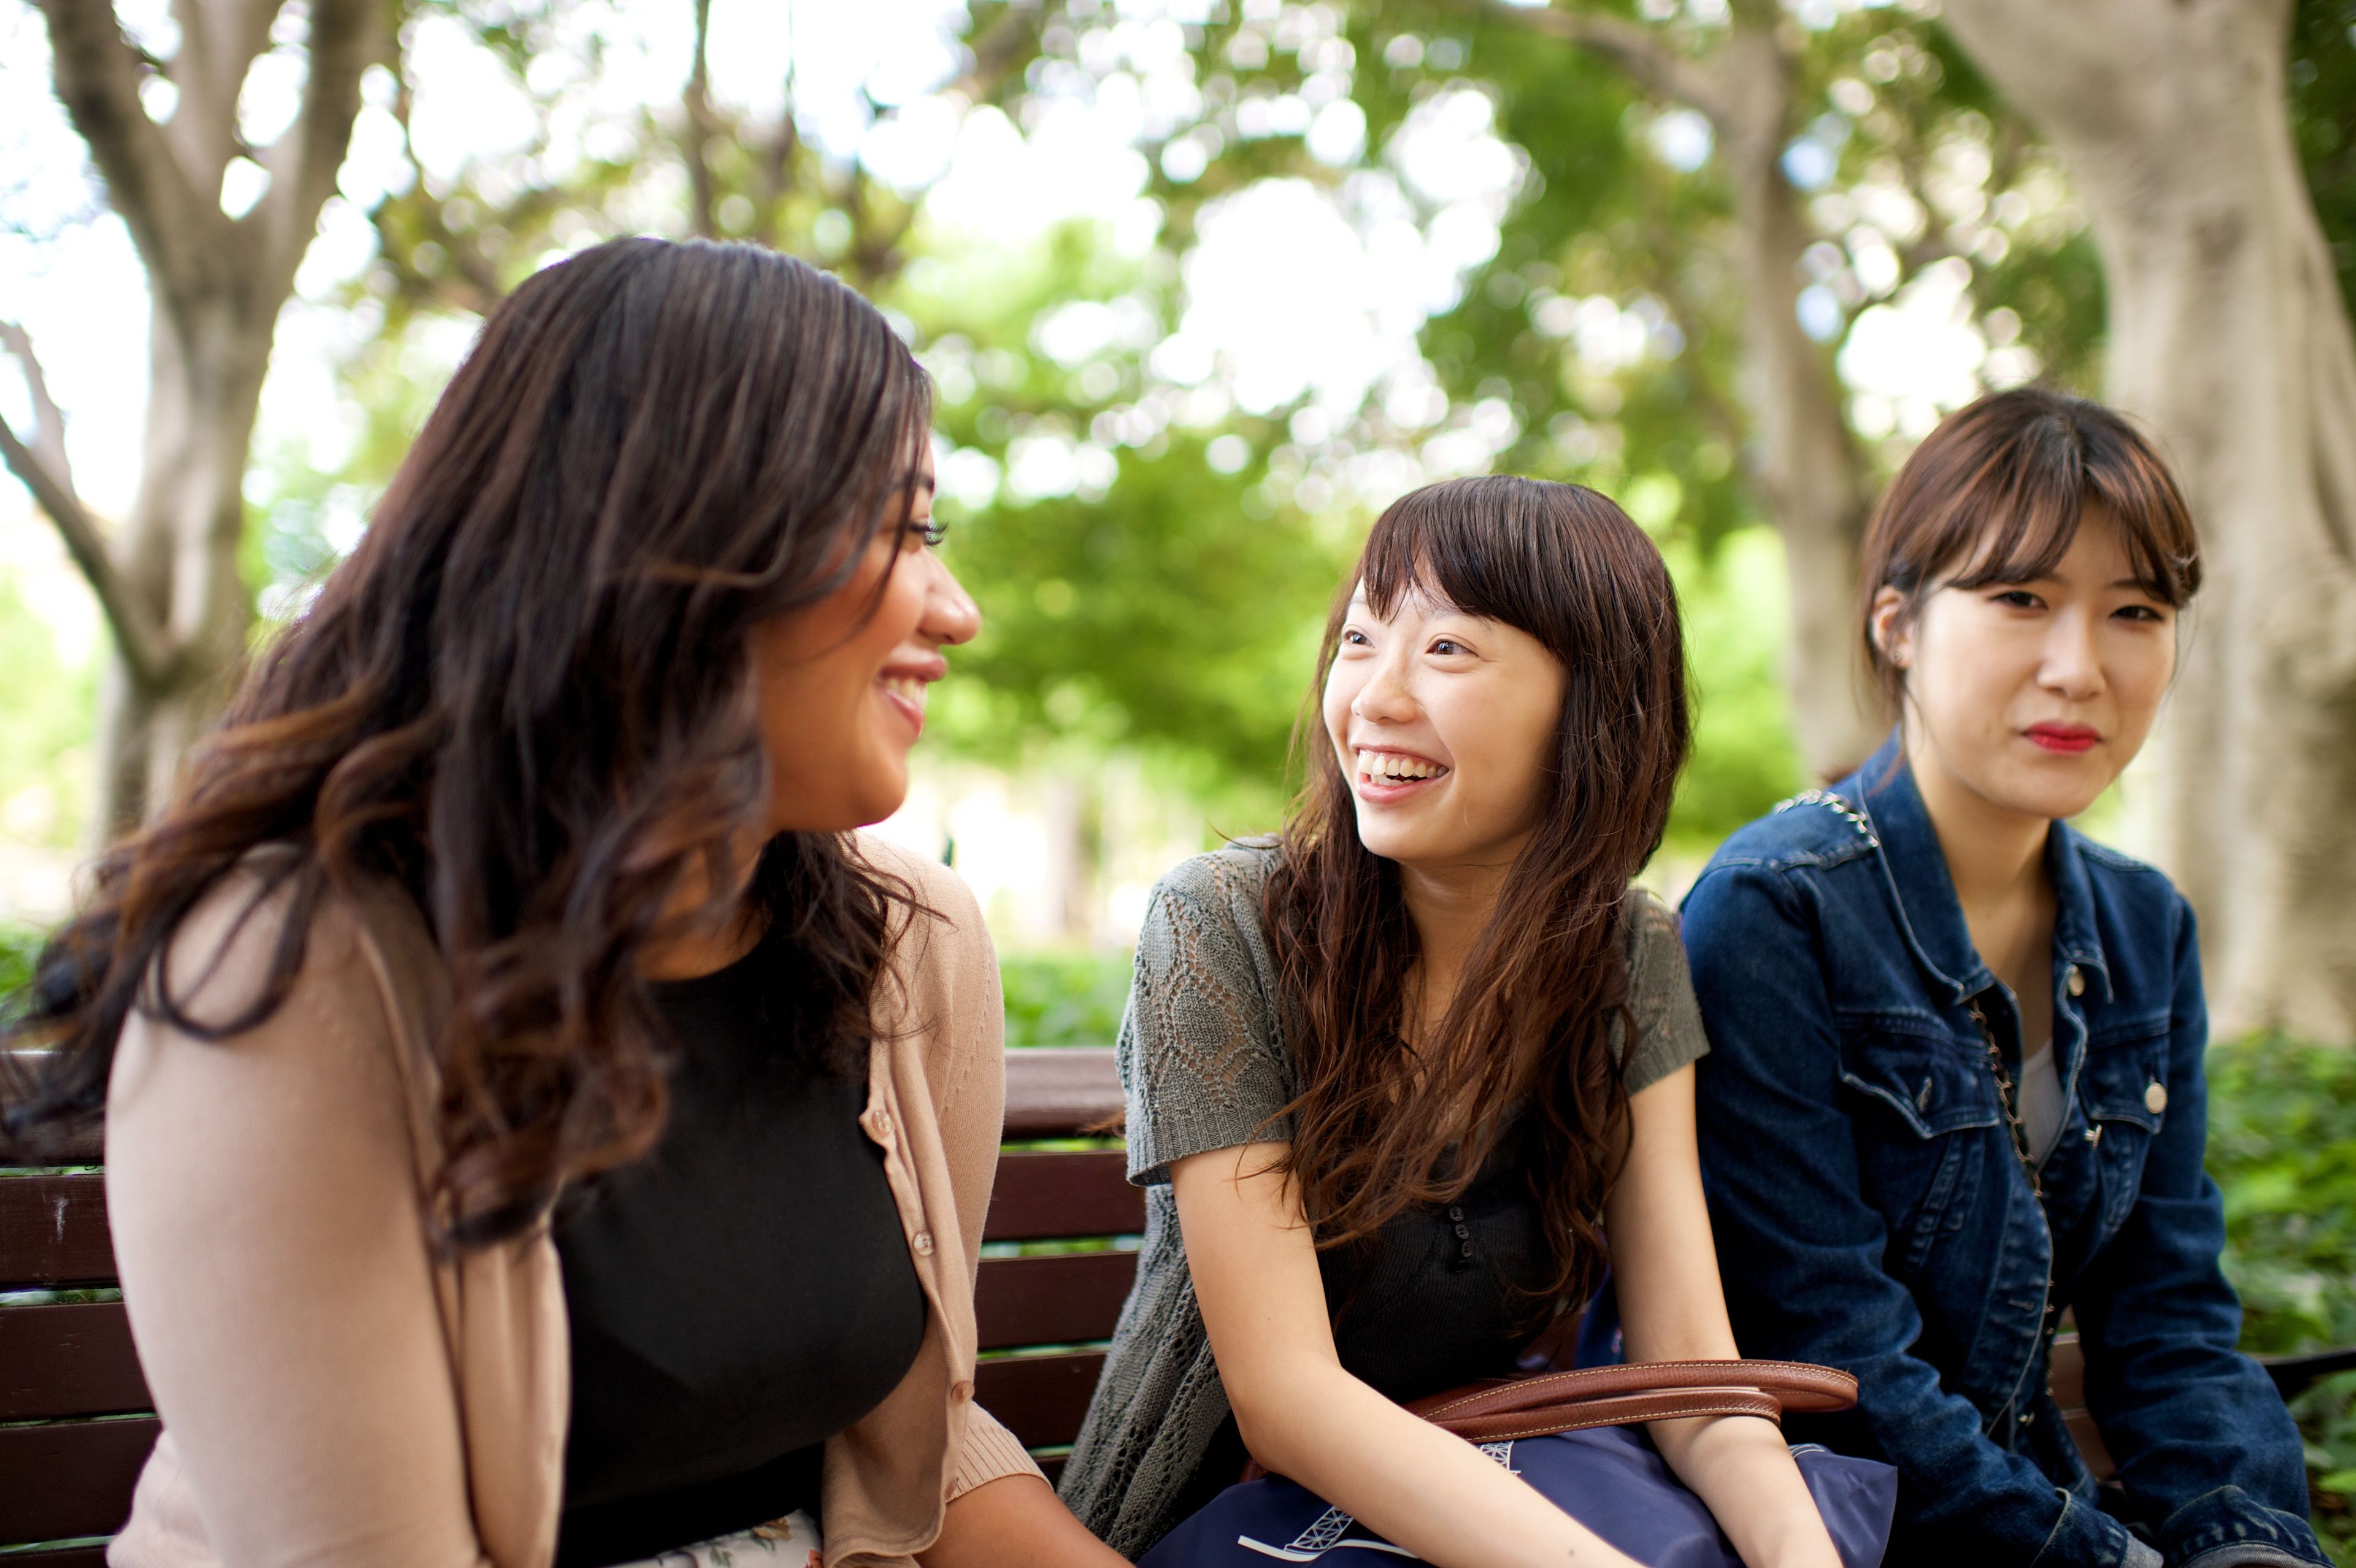 Three young women sit on a park bench together and talk.